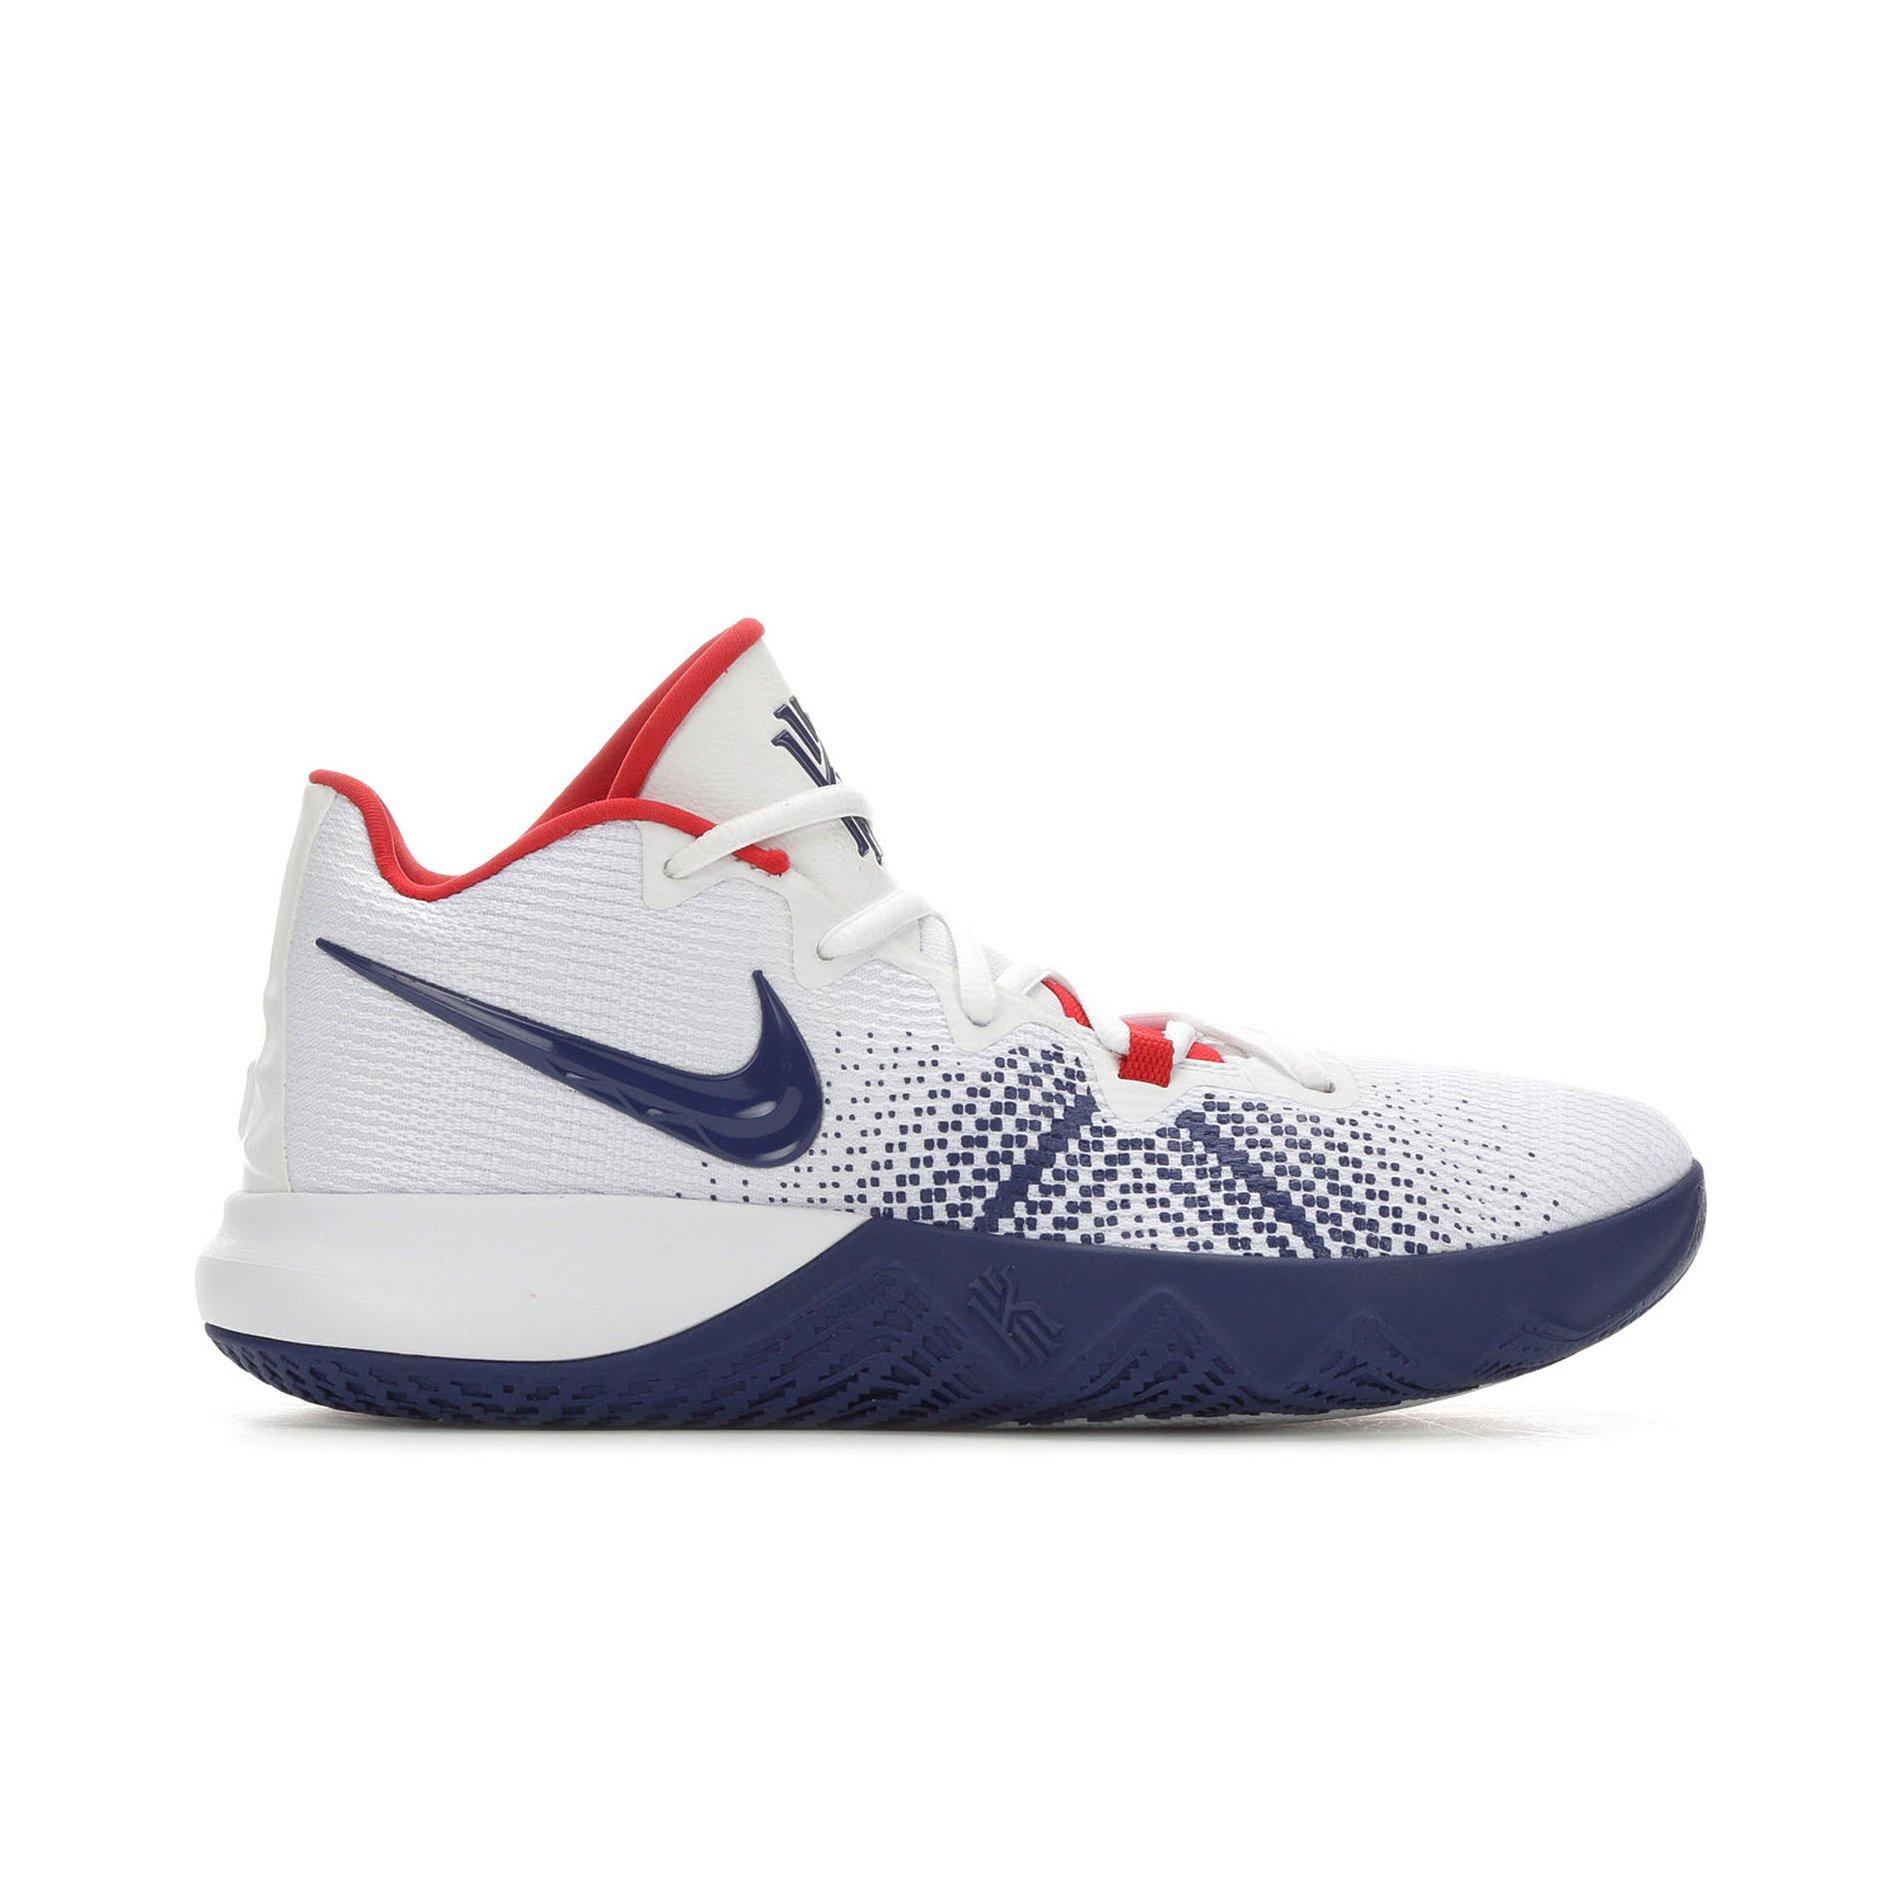 kyrie irving red white blue shoes